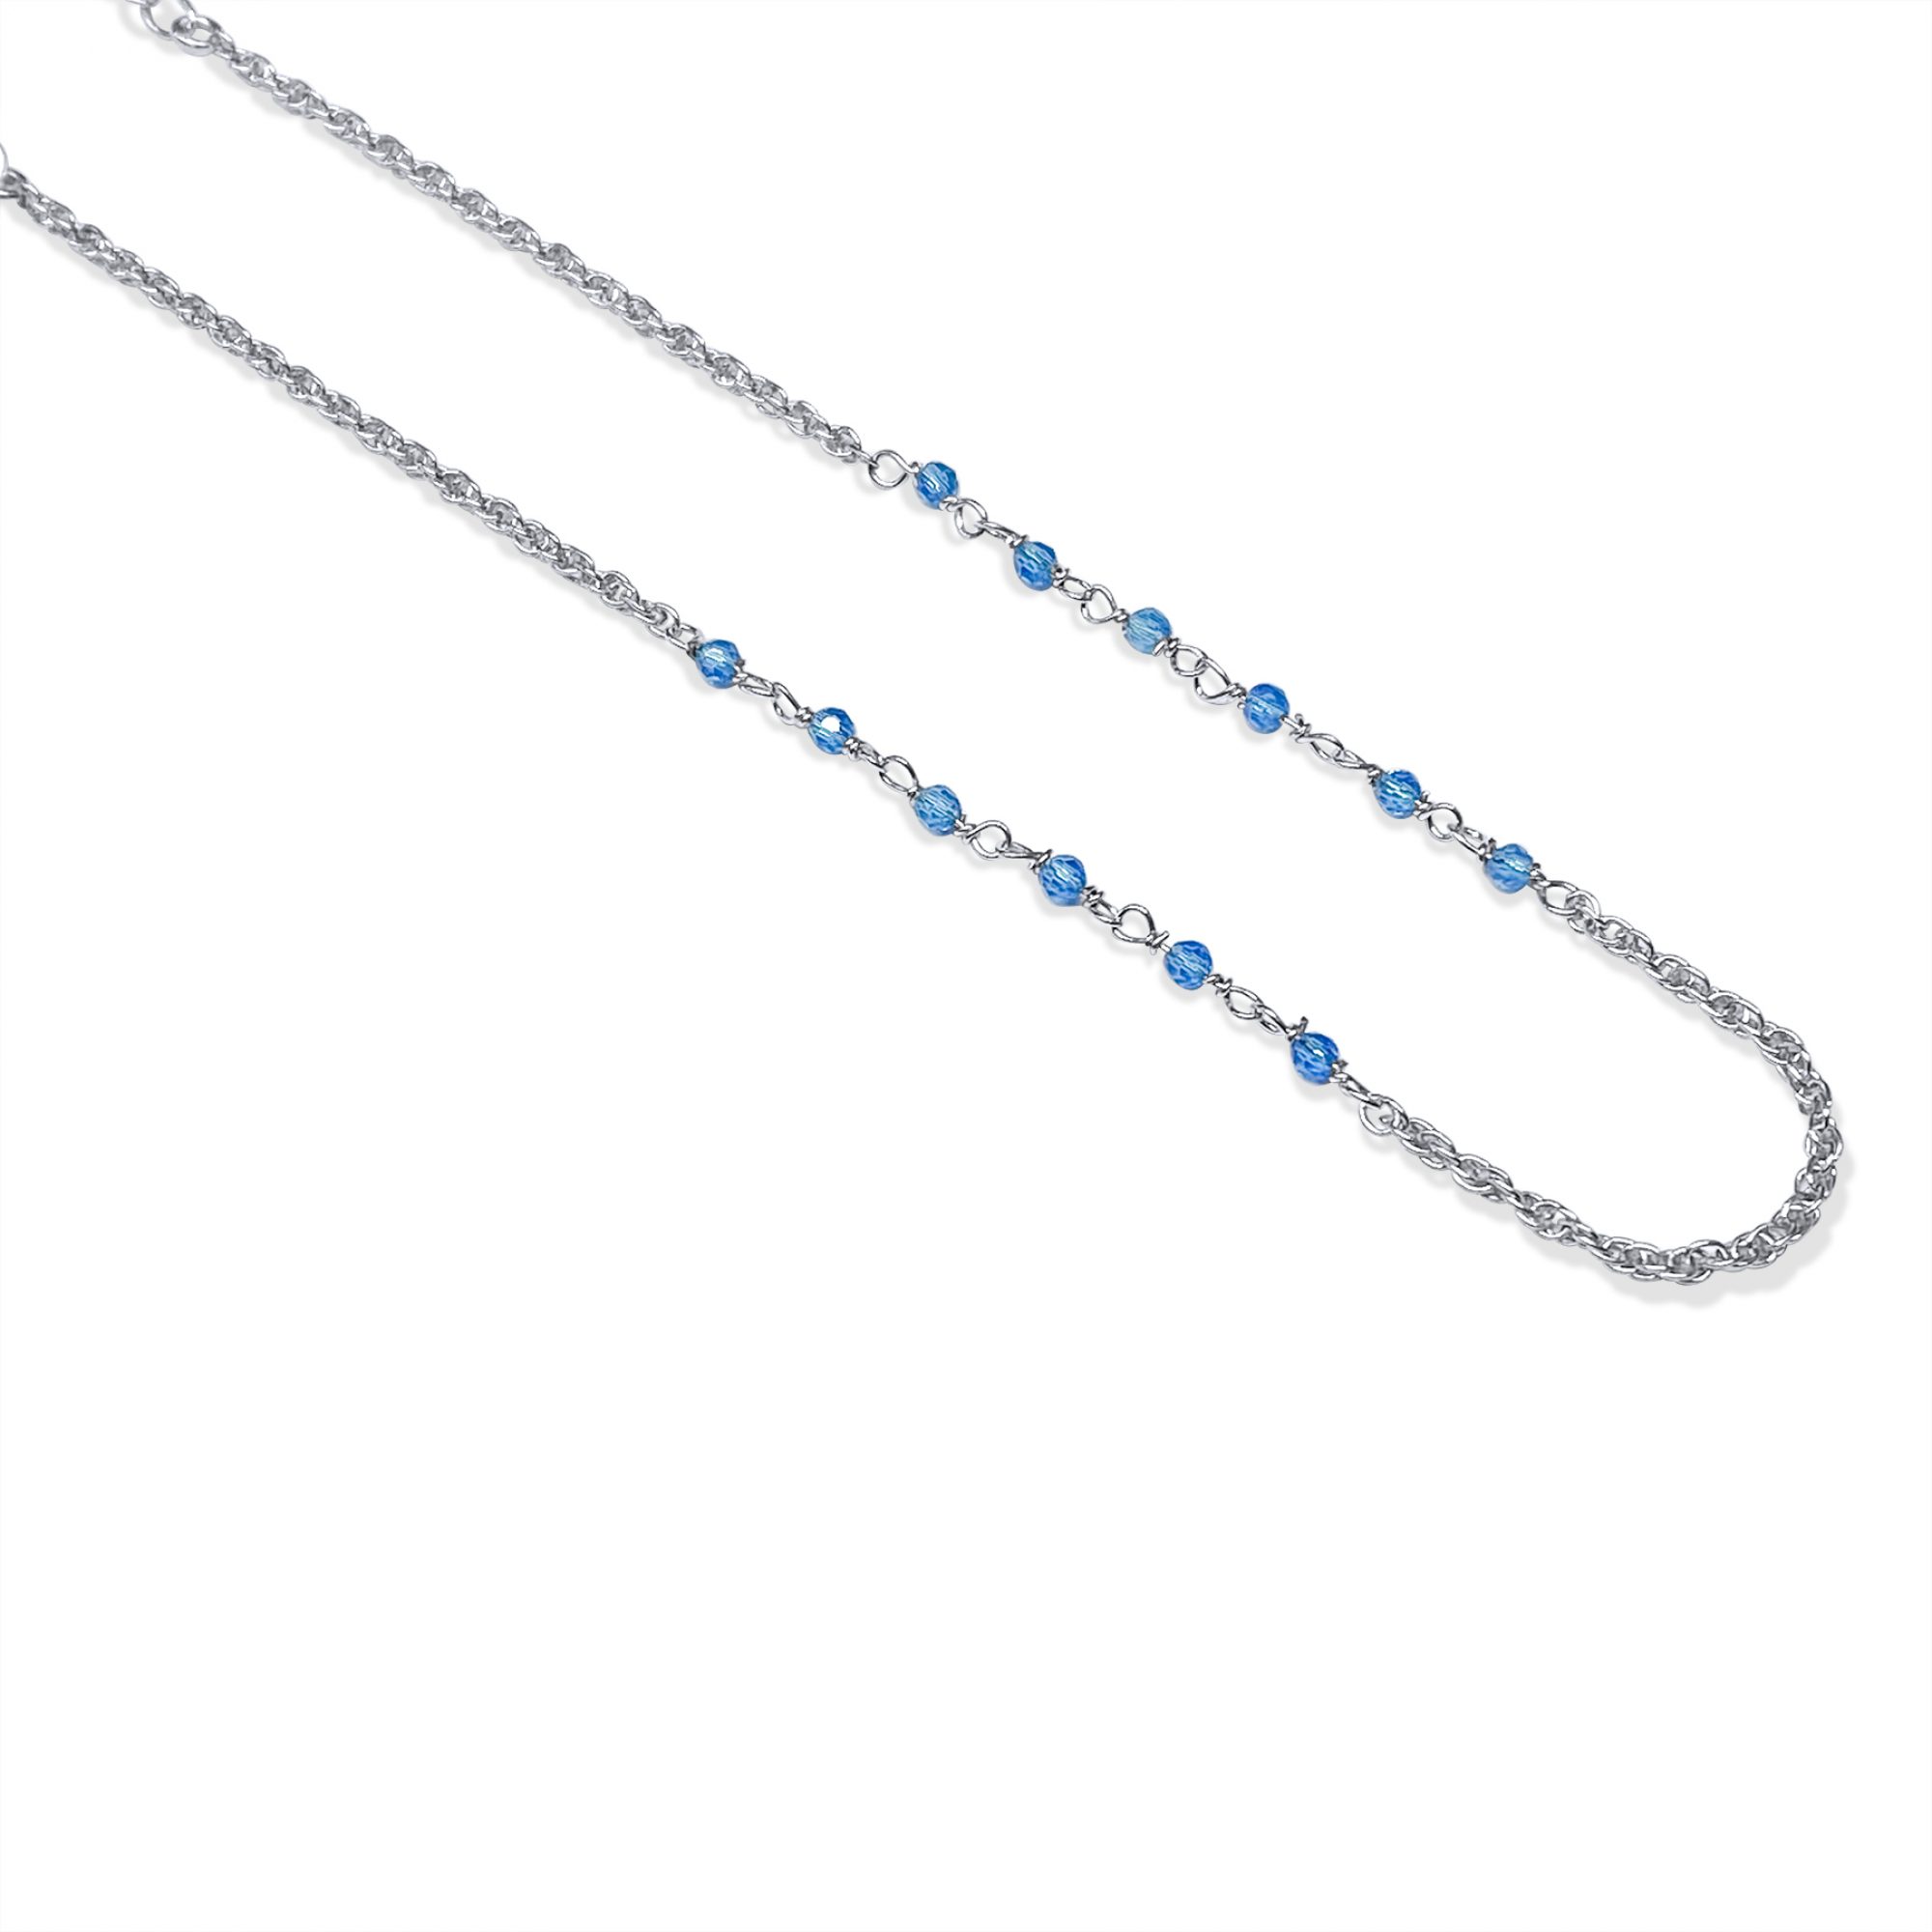 Anklet with blue beads